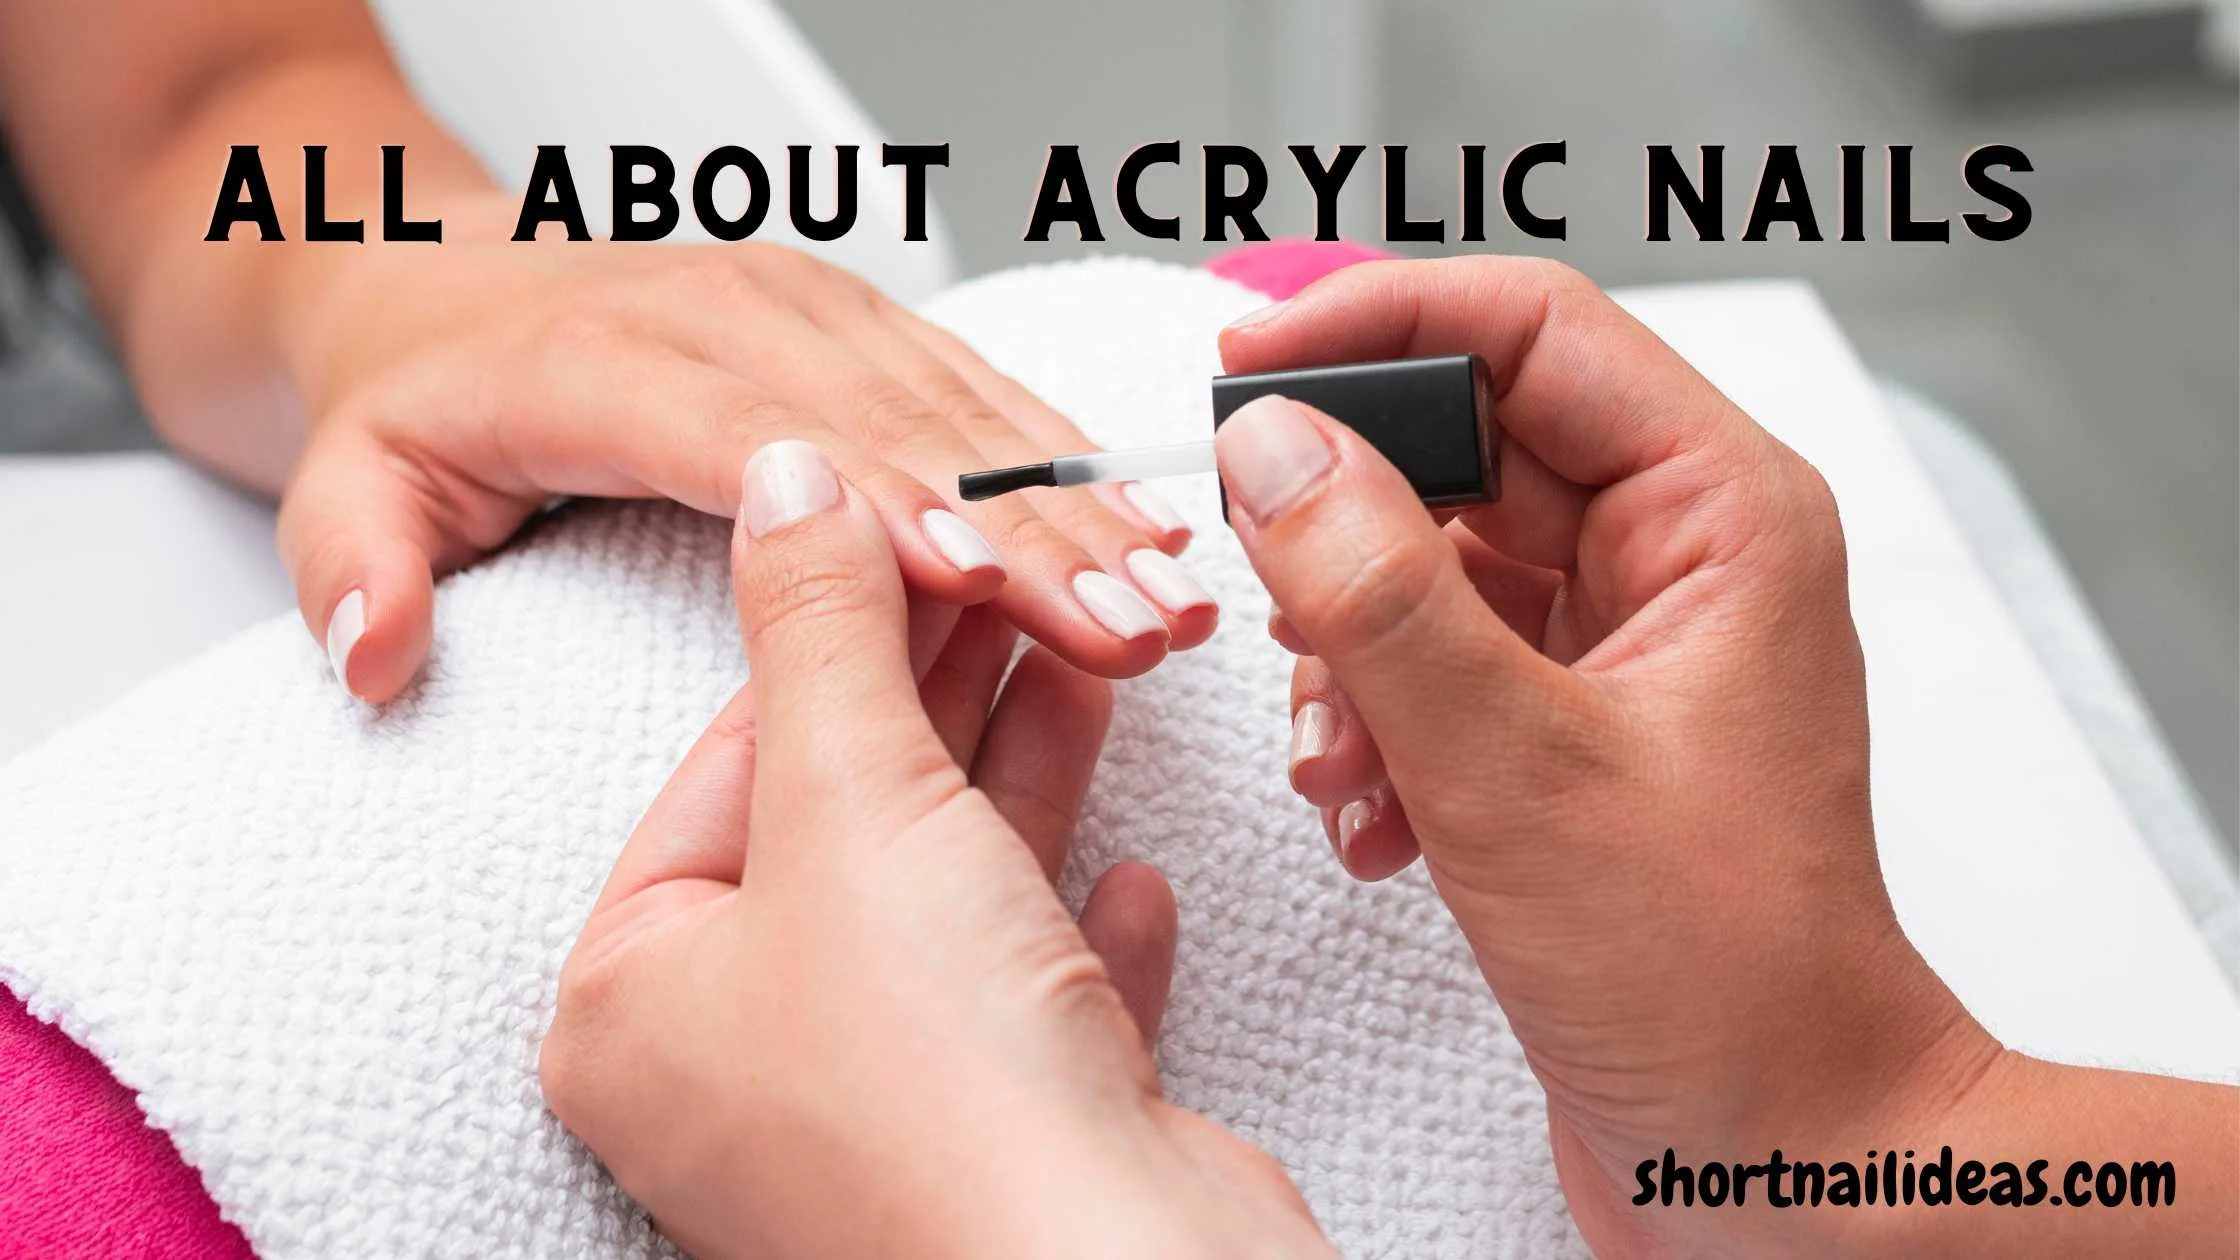 Acrylic Nails : All You Need to Know About